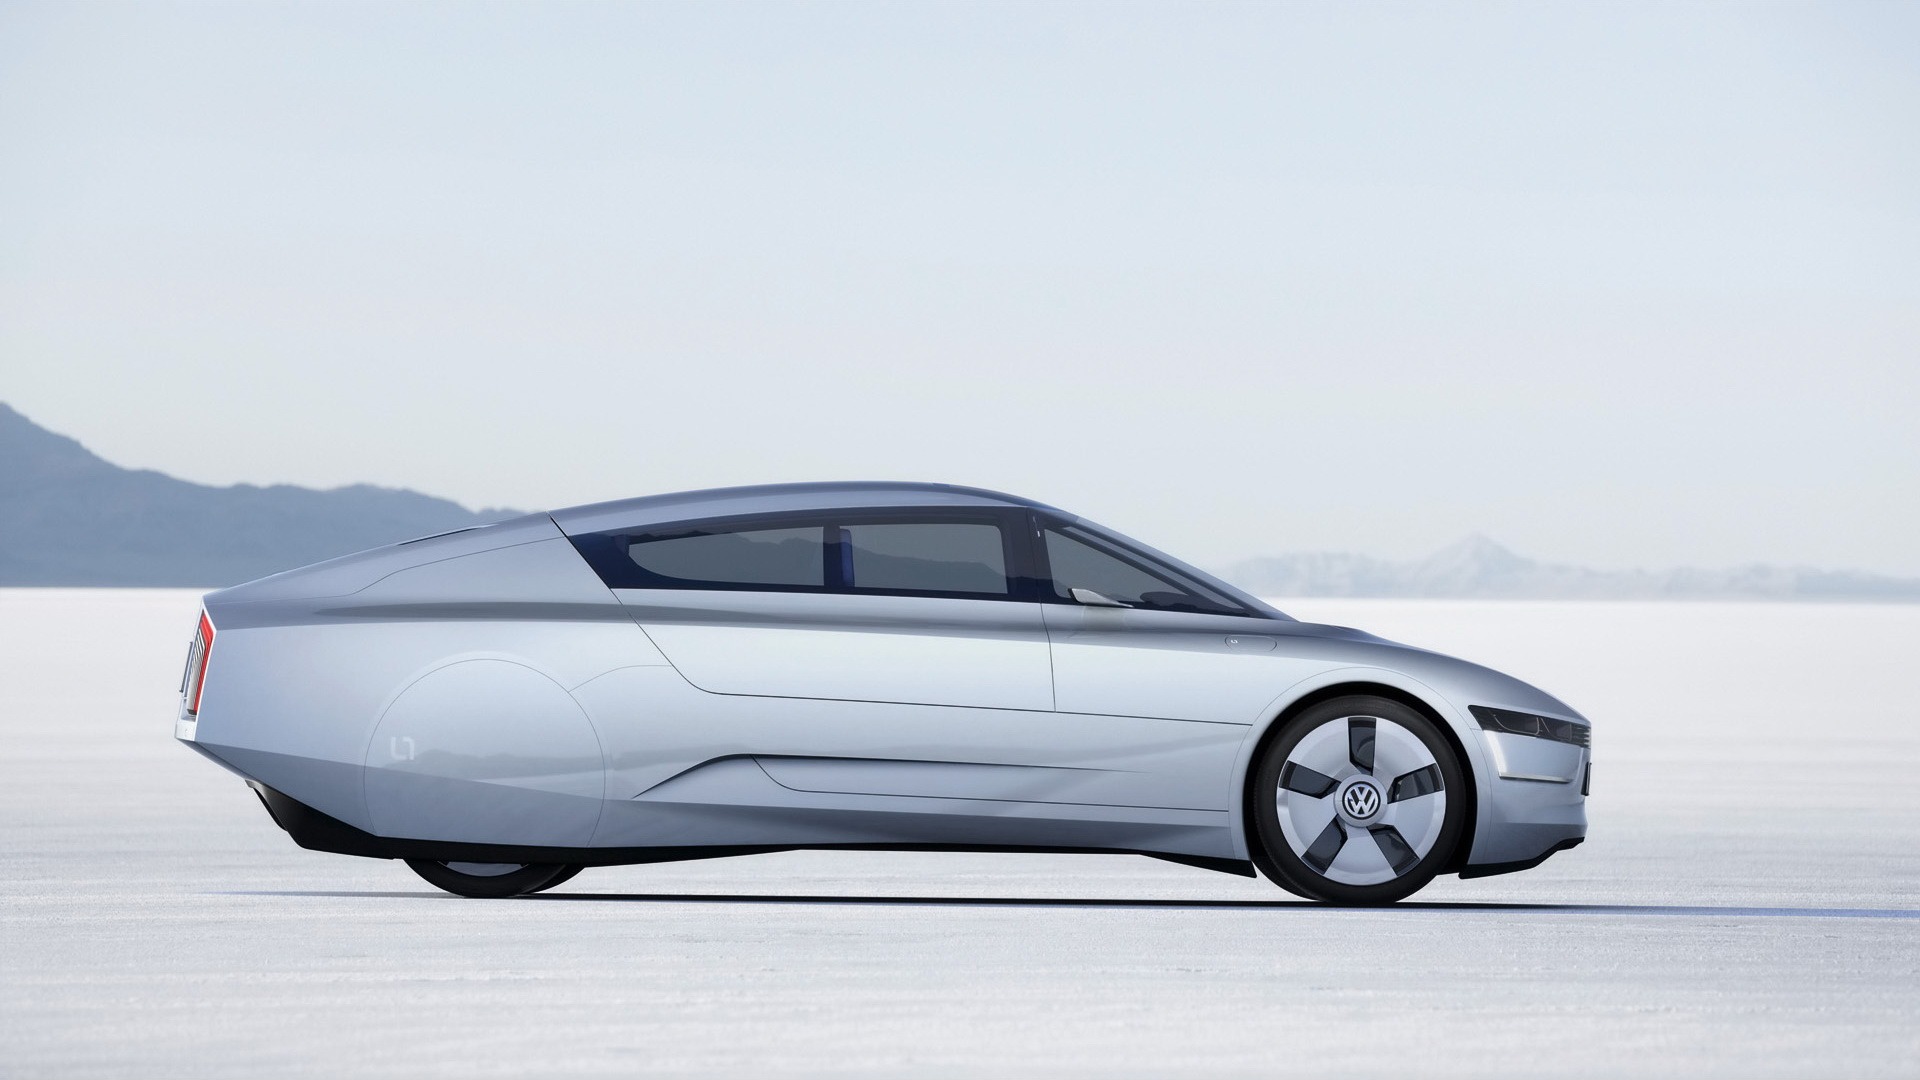 Volkswagen L1 Tapety Concept Car #18 - 1920x1080